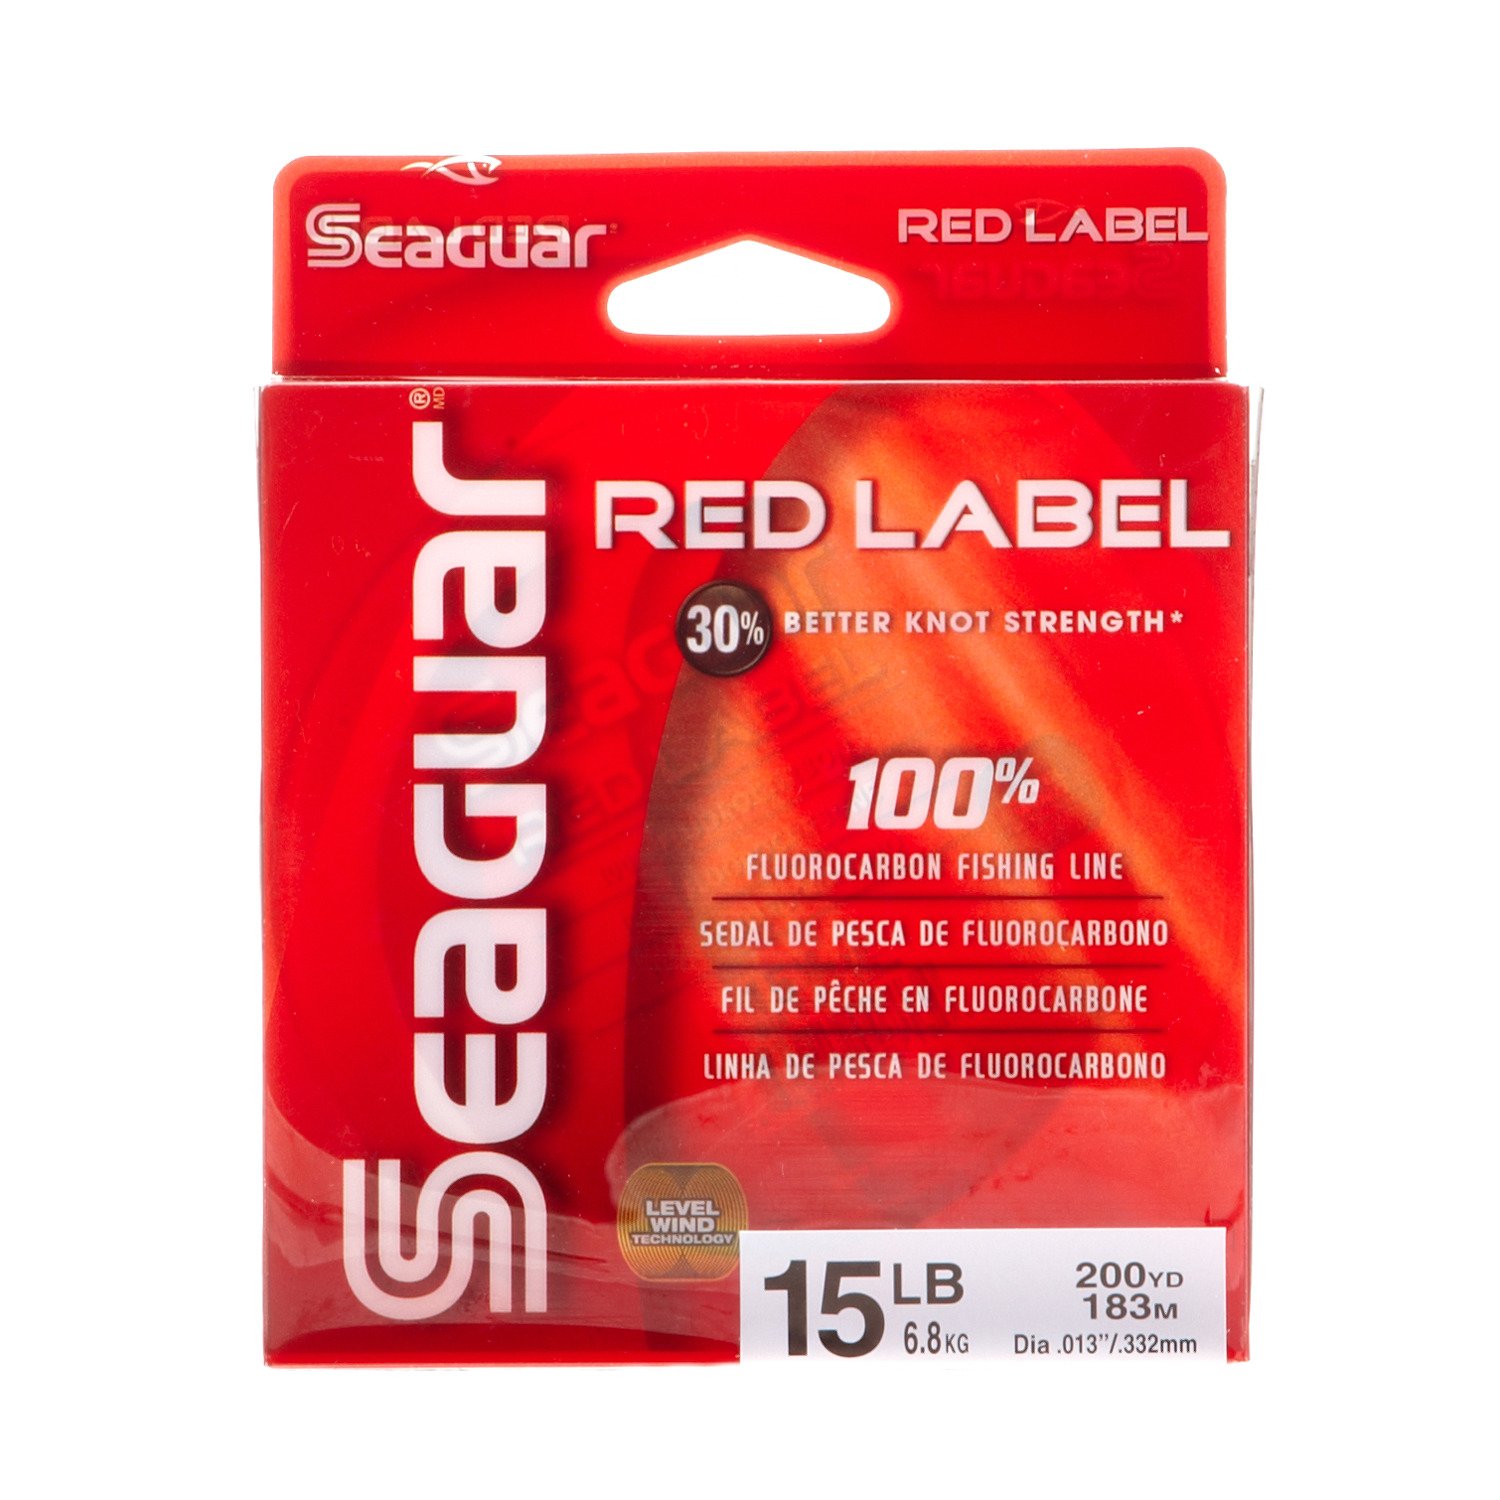 Seaguar Red Label 100% Fluorocarbon Fishing Line 12lbs, 200yds Break  Strength/Length - 12RM200